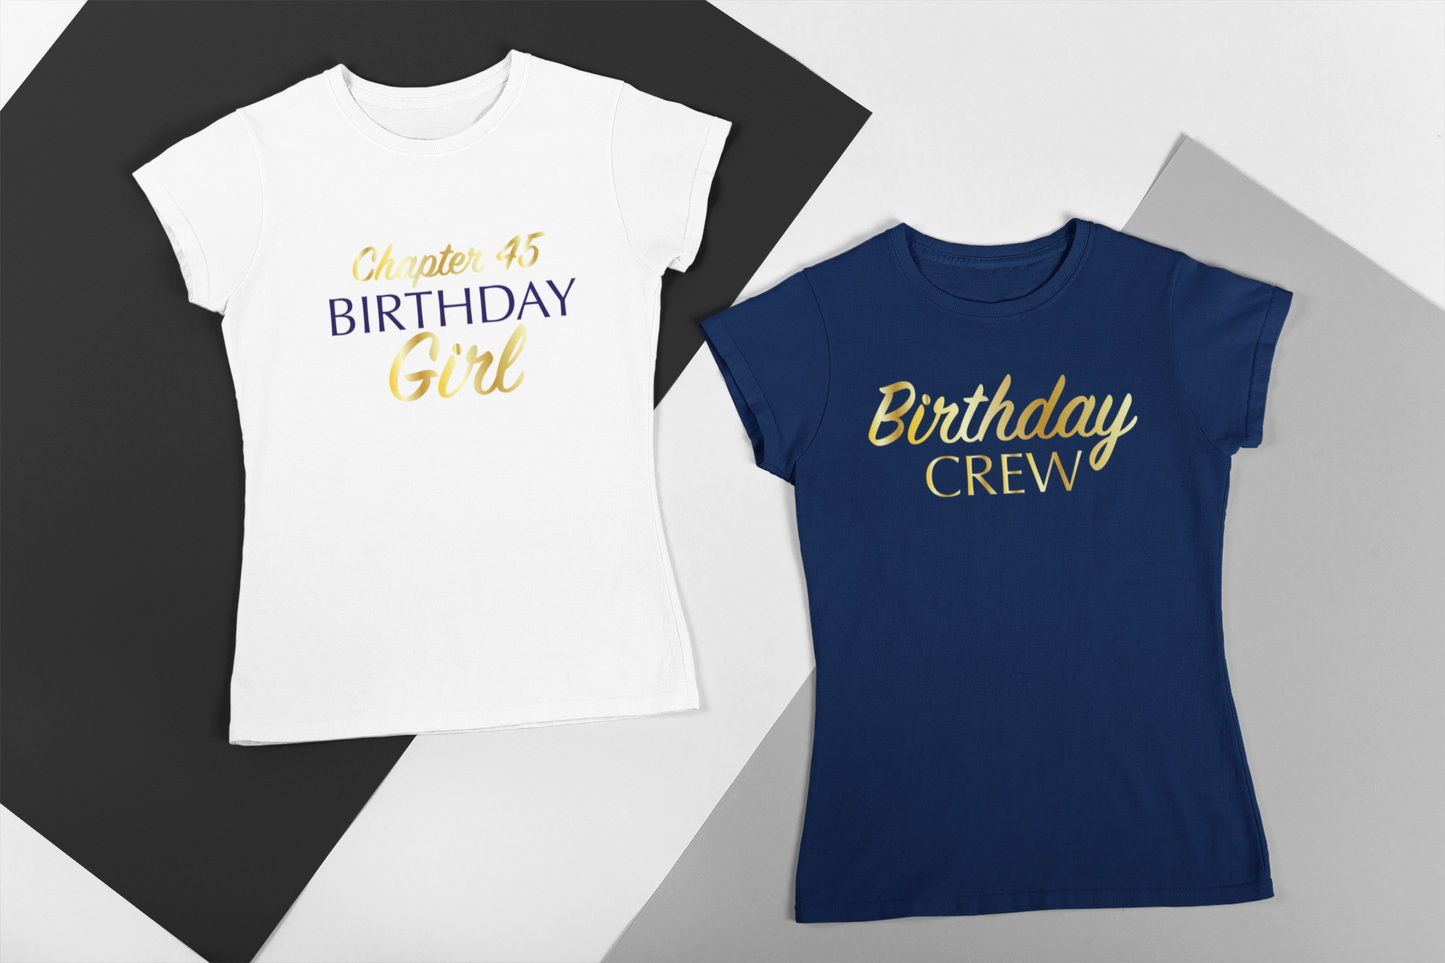 Birthday Girl and Crew T-Shirt - Chapter 45